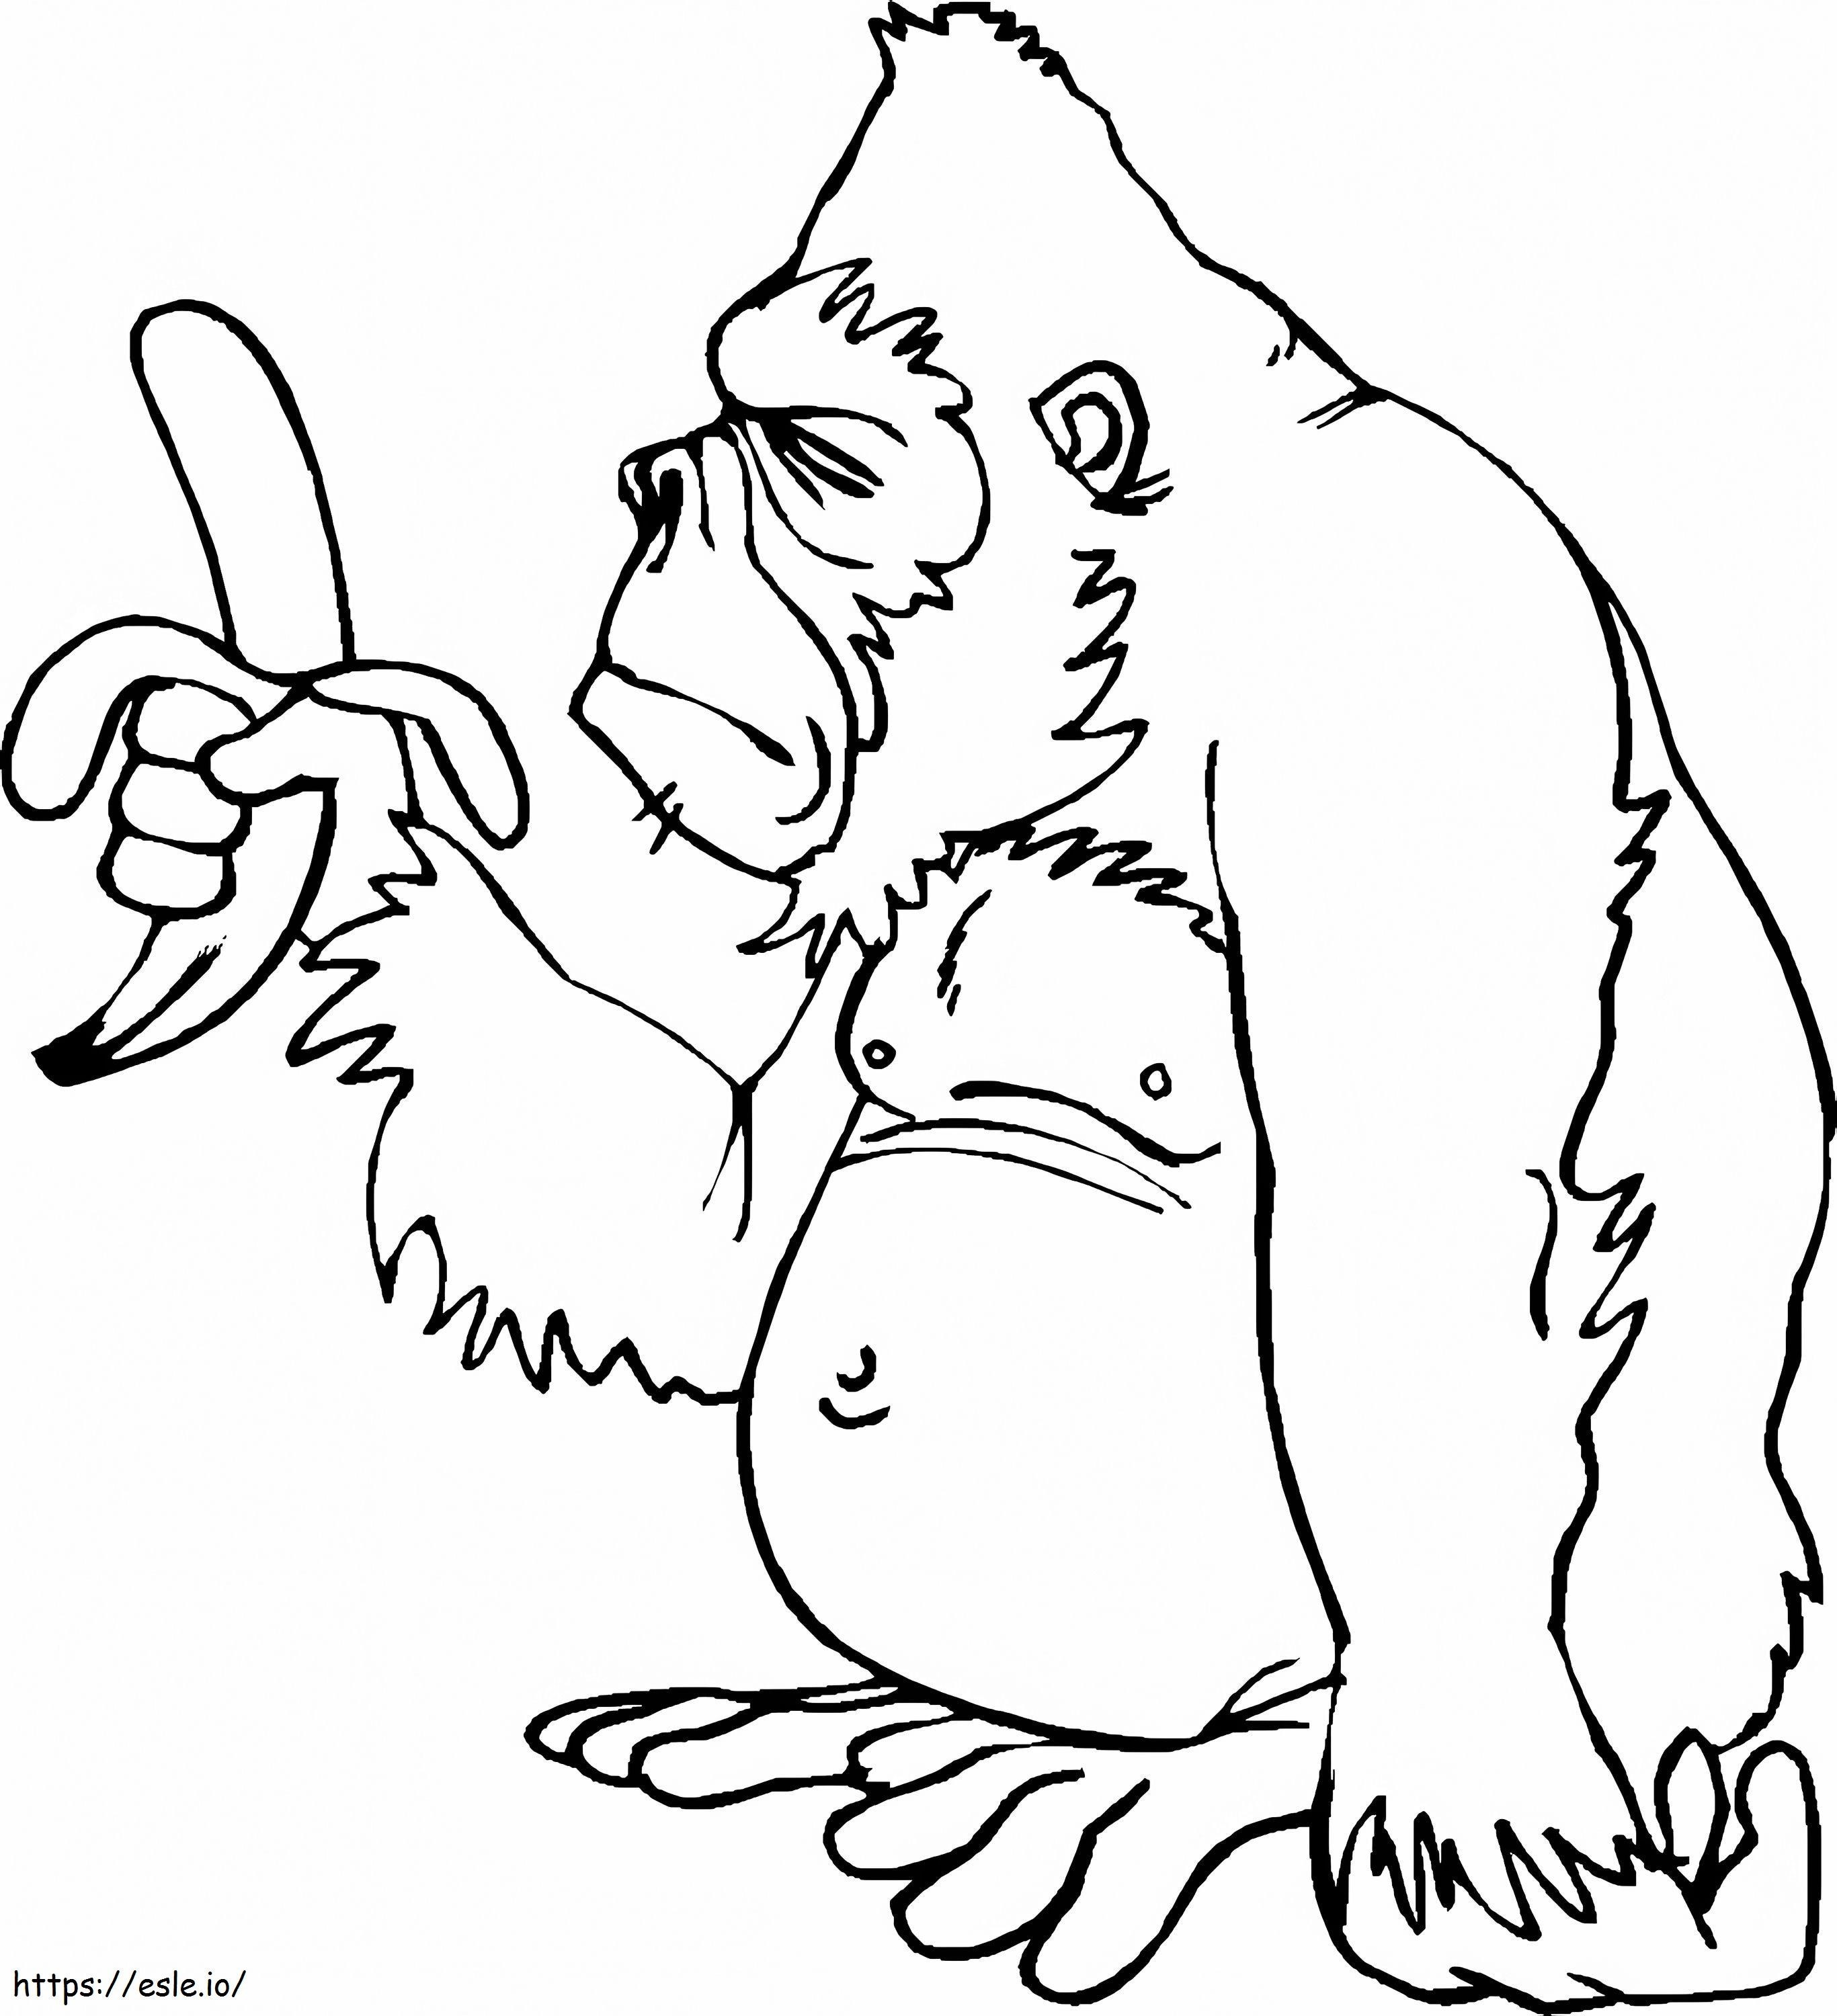 1539401521_Monkey 32 7047 coloring page